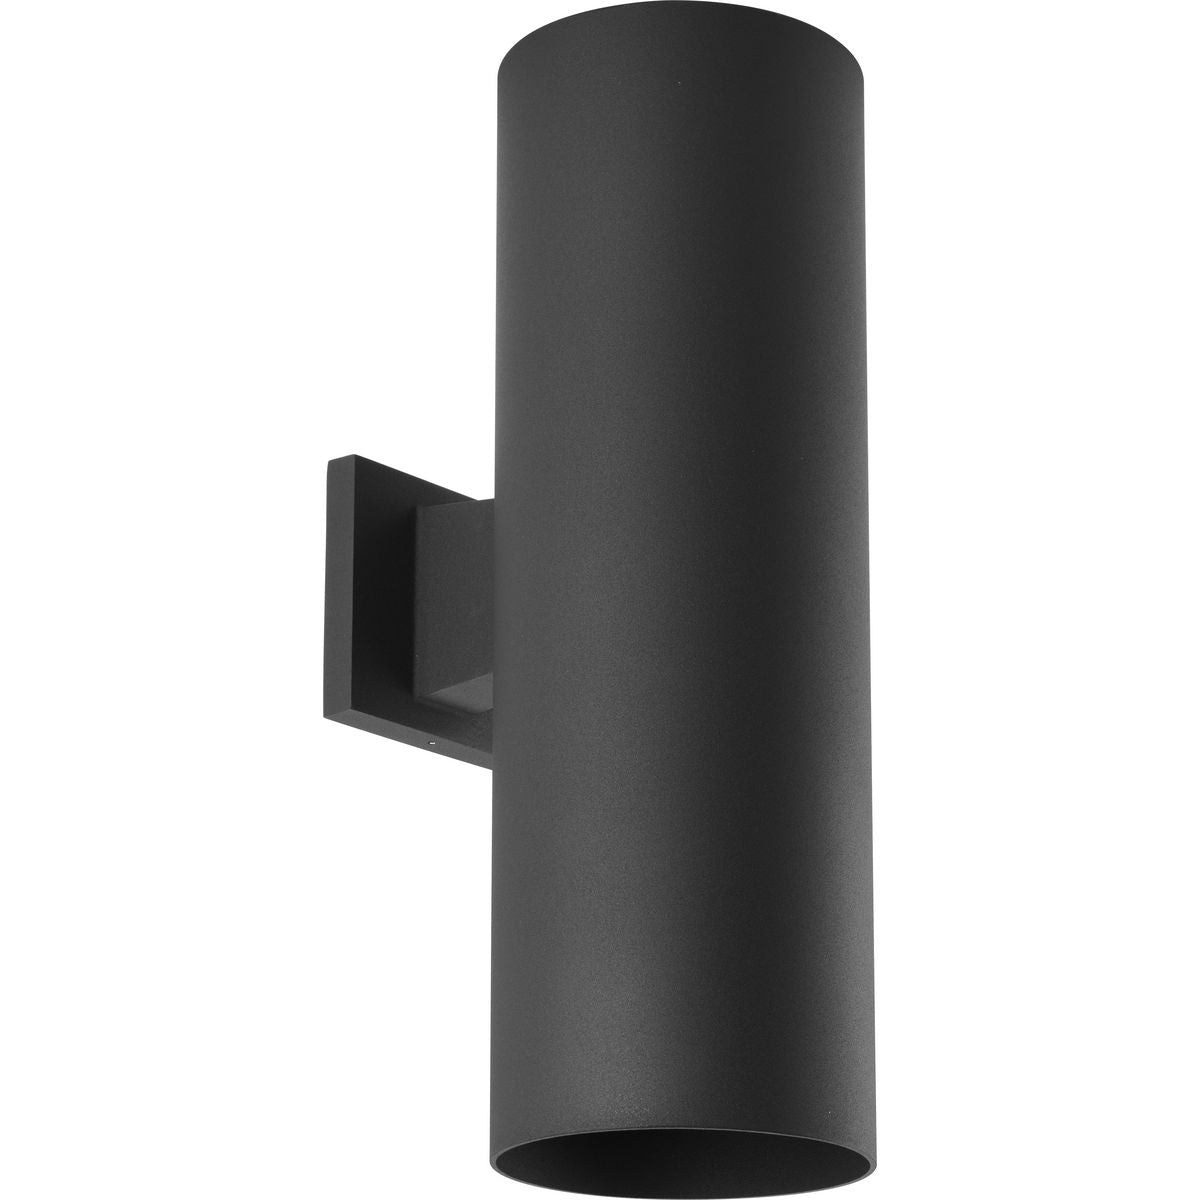 Cyl Rnds 6" Outdoor Wall Light